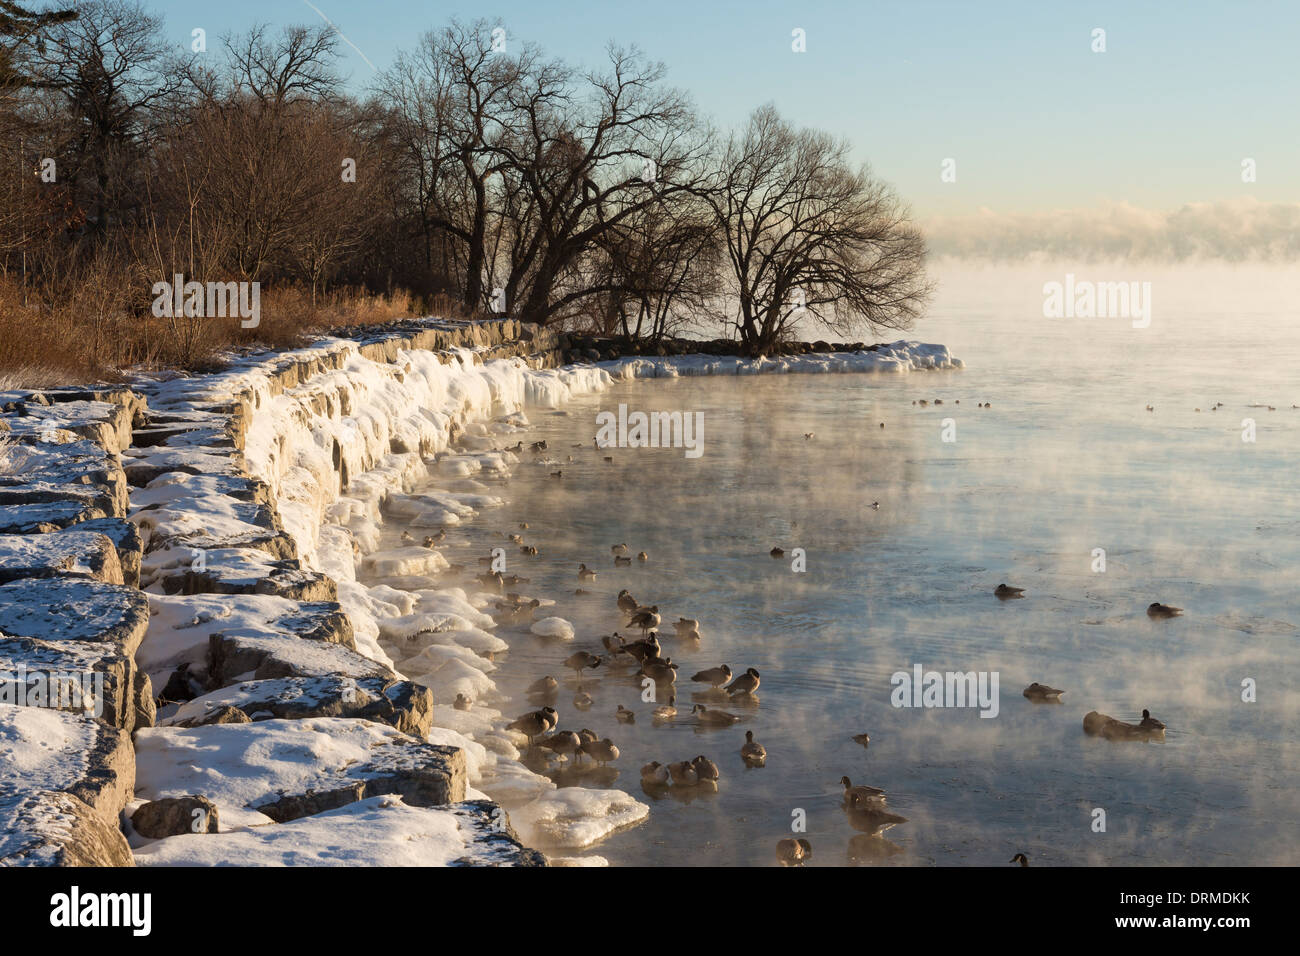 Ducks, geese and other waterfowl bath along the steaming and partially frozen Lake Ontario shoreline in extreme cold Stock Photo